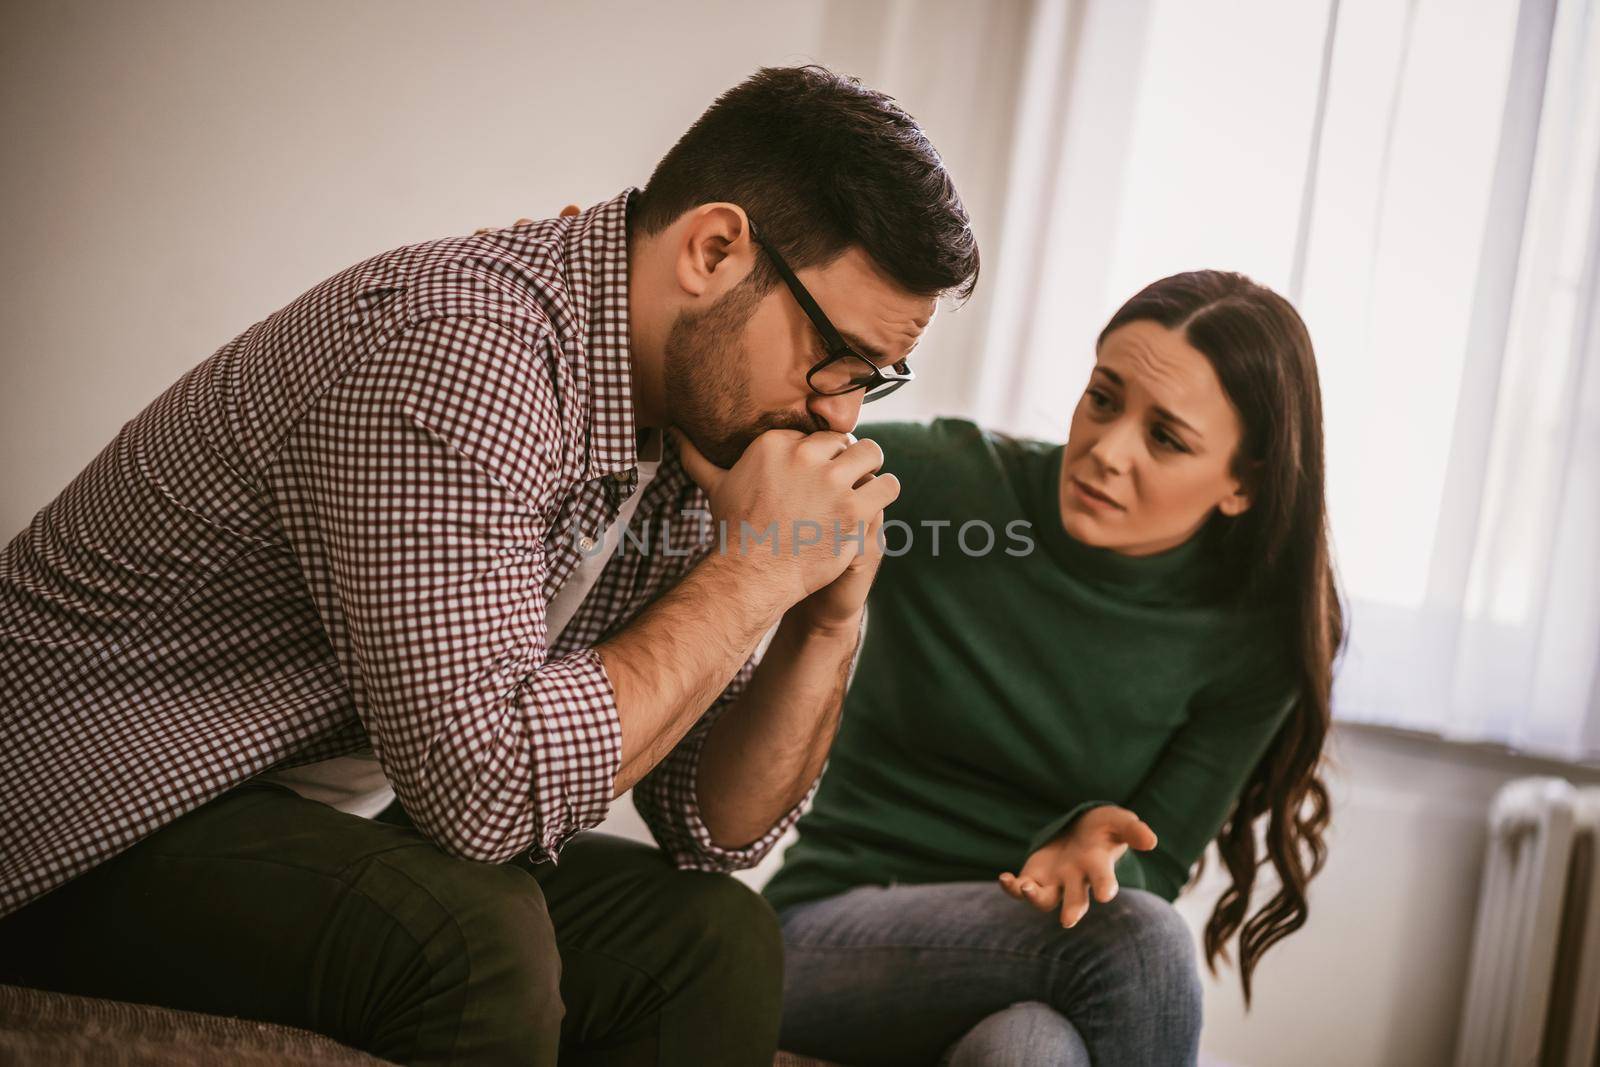 Man is sad and depressed, his wife is consoling him.